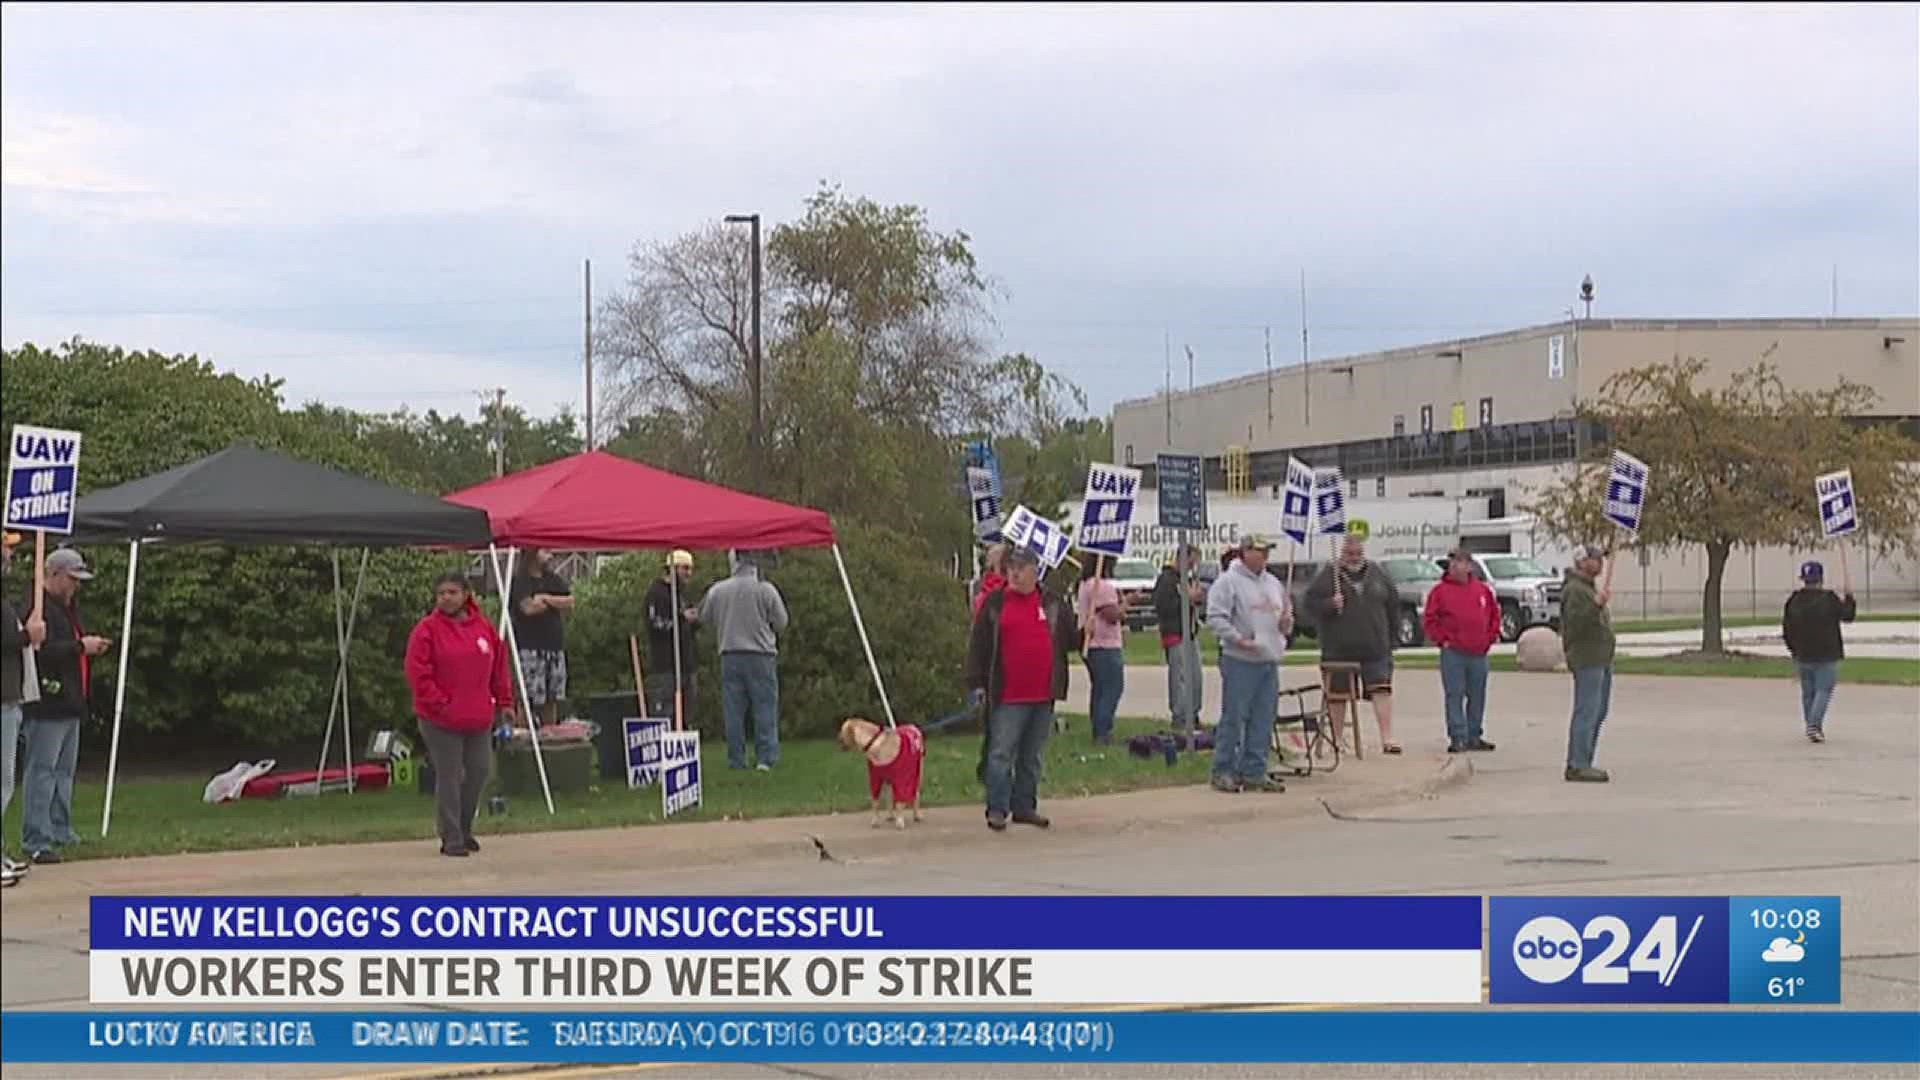 The strike came after the union says negotiations for a new national-level contract were unsuccessful